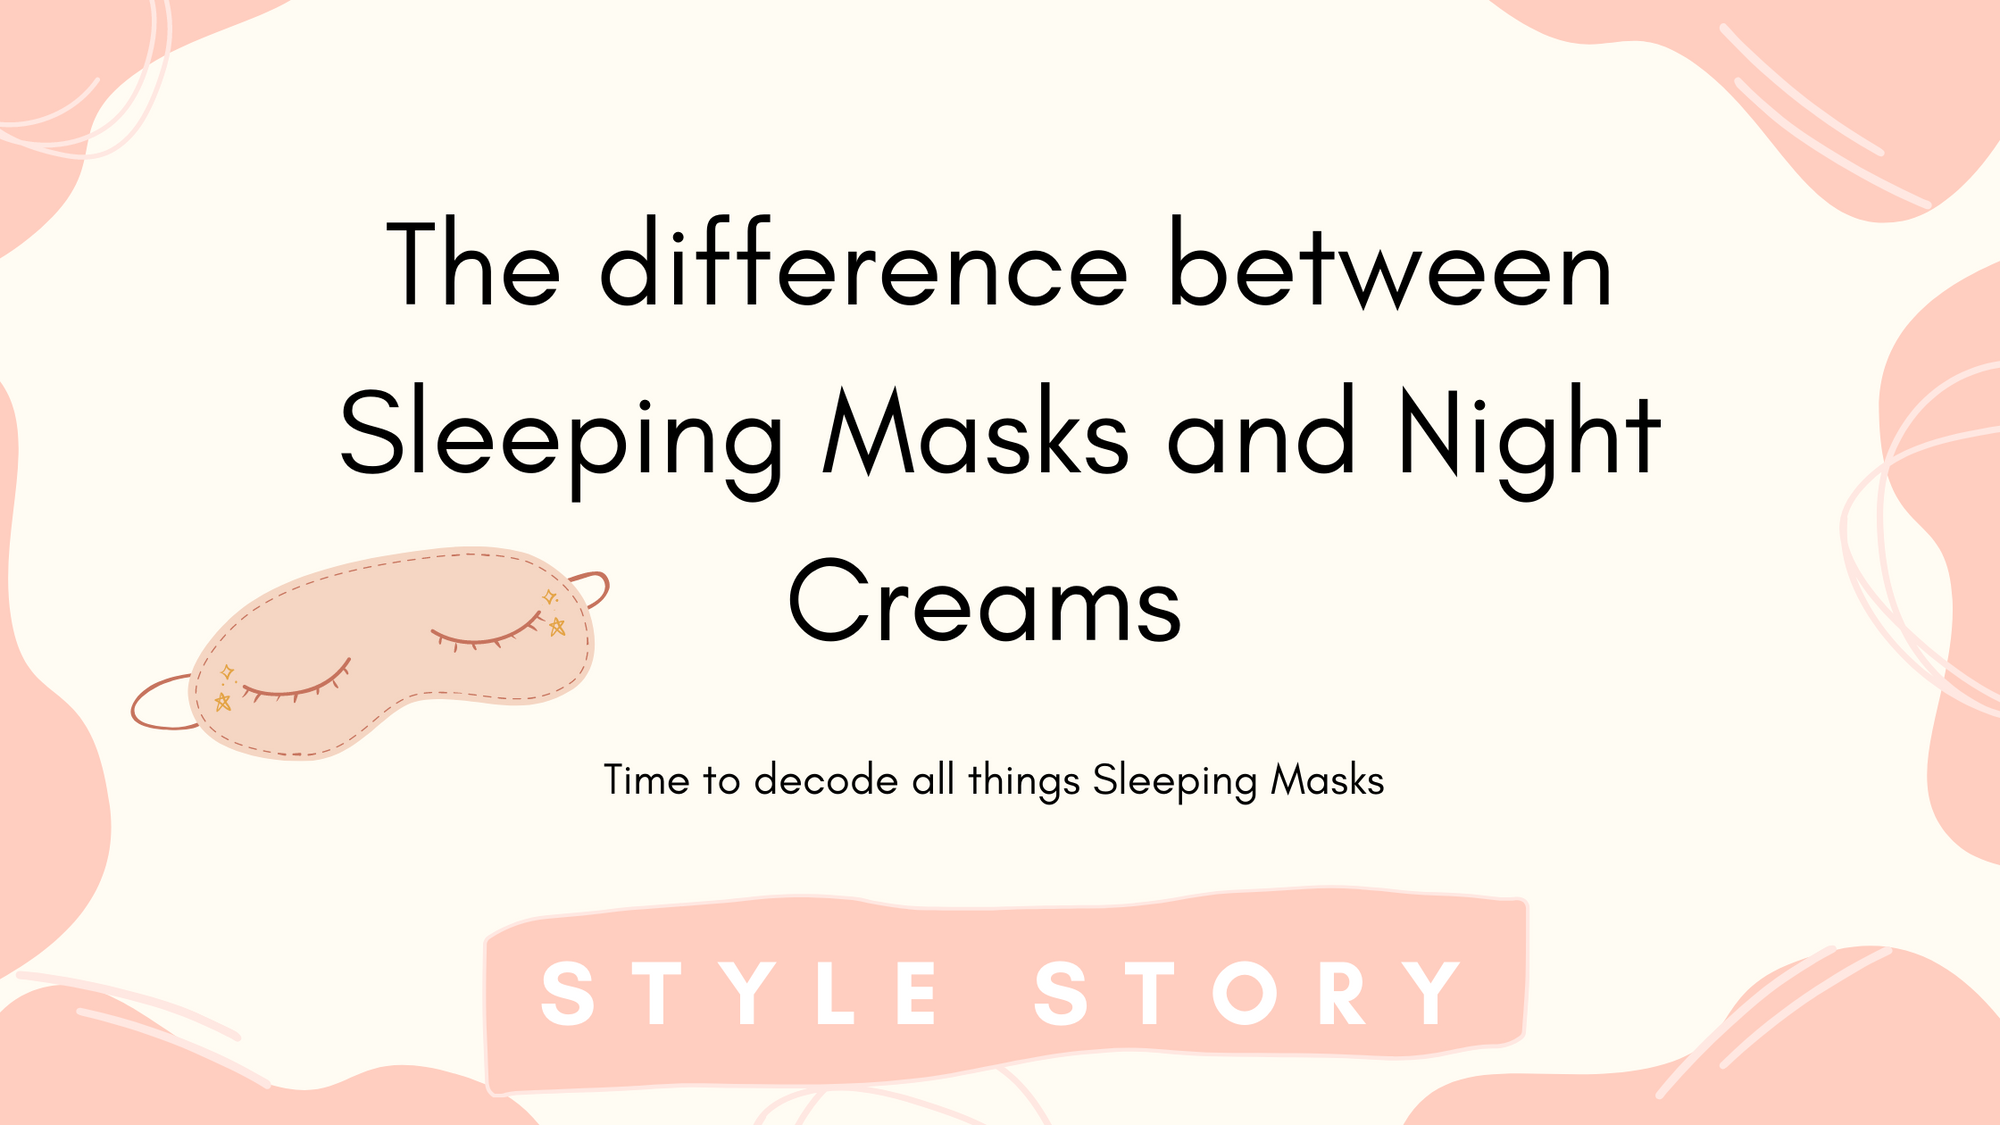 The Difference between Sleeping Masks and Night Creams